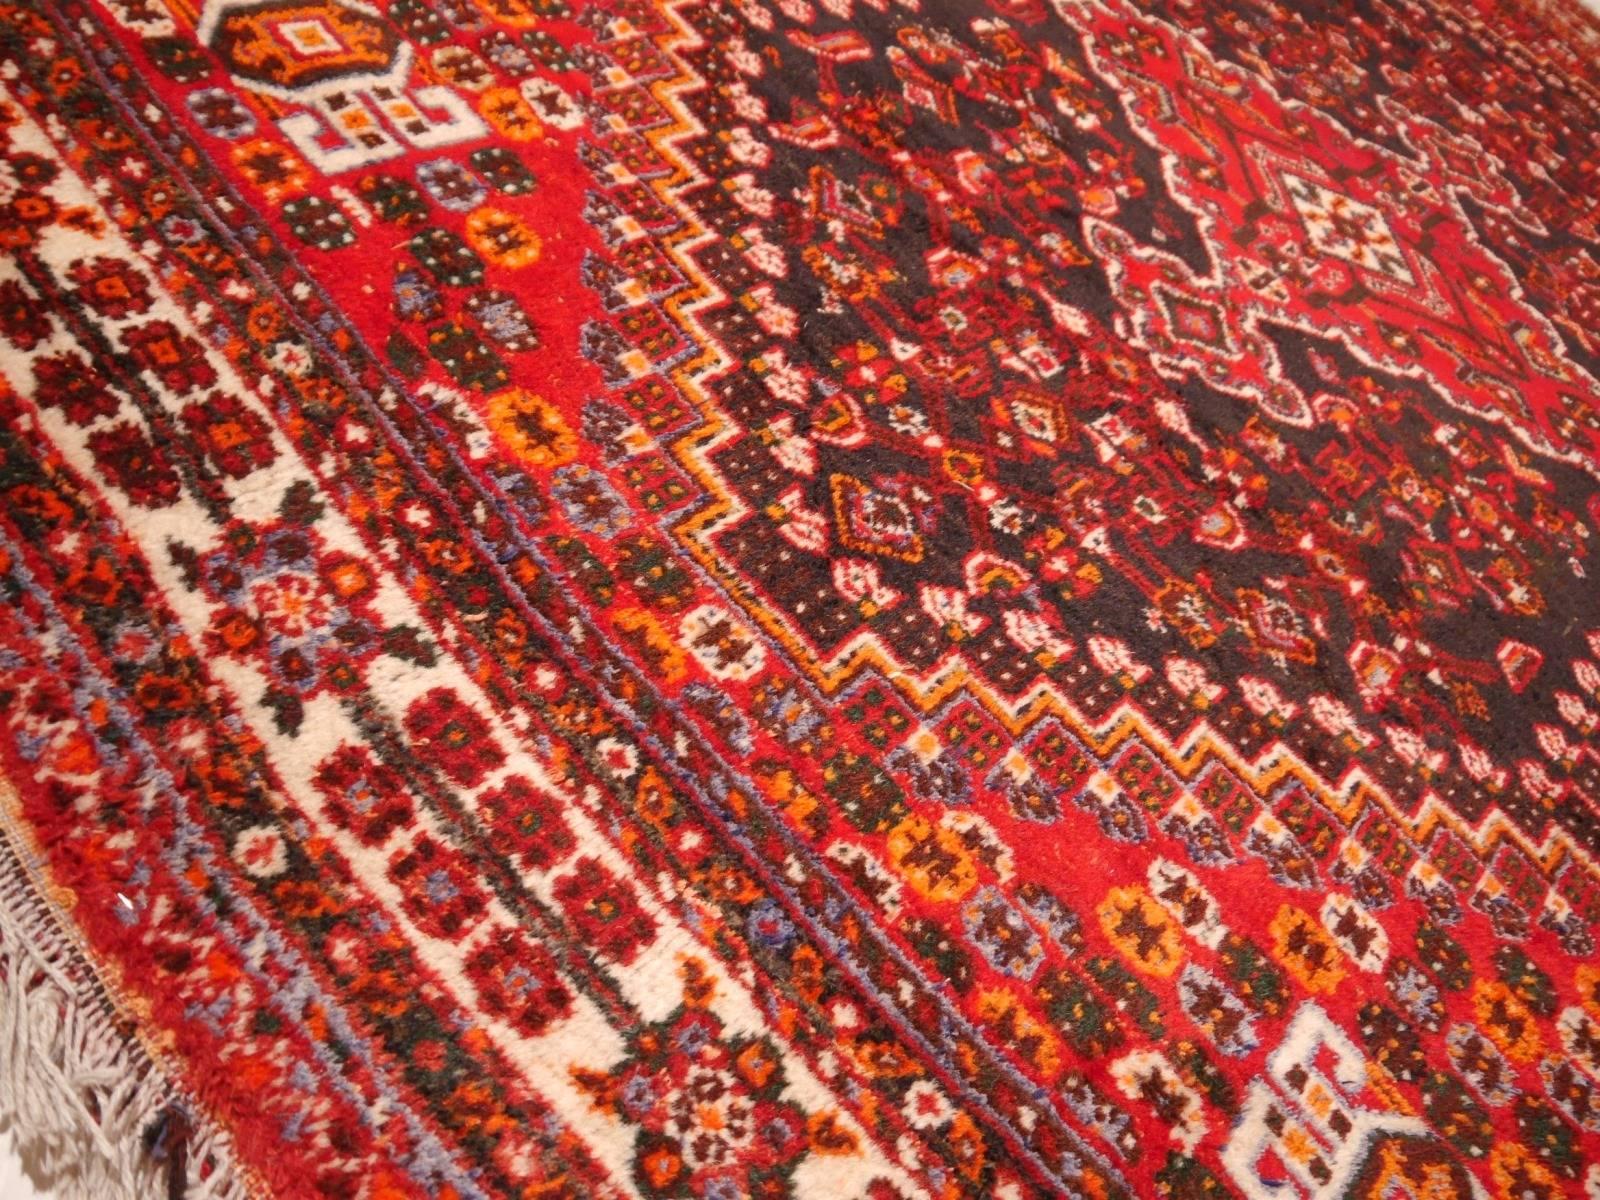 Beautiful hand-knotted tribal Persian rug from the Qashqai tribe in South Persia. Pile and warp are made of original highland wool. The rug shows traditional designs.